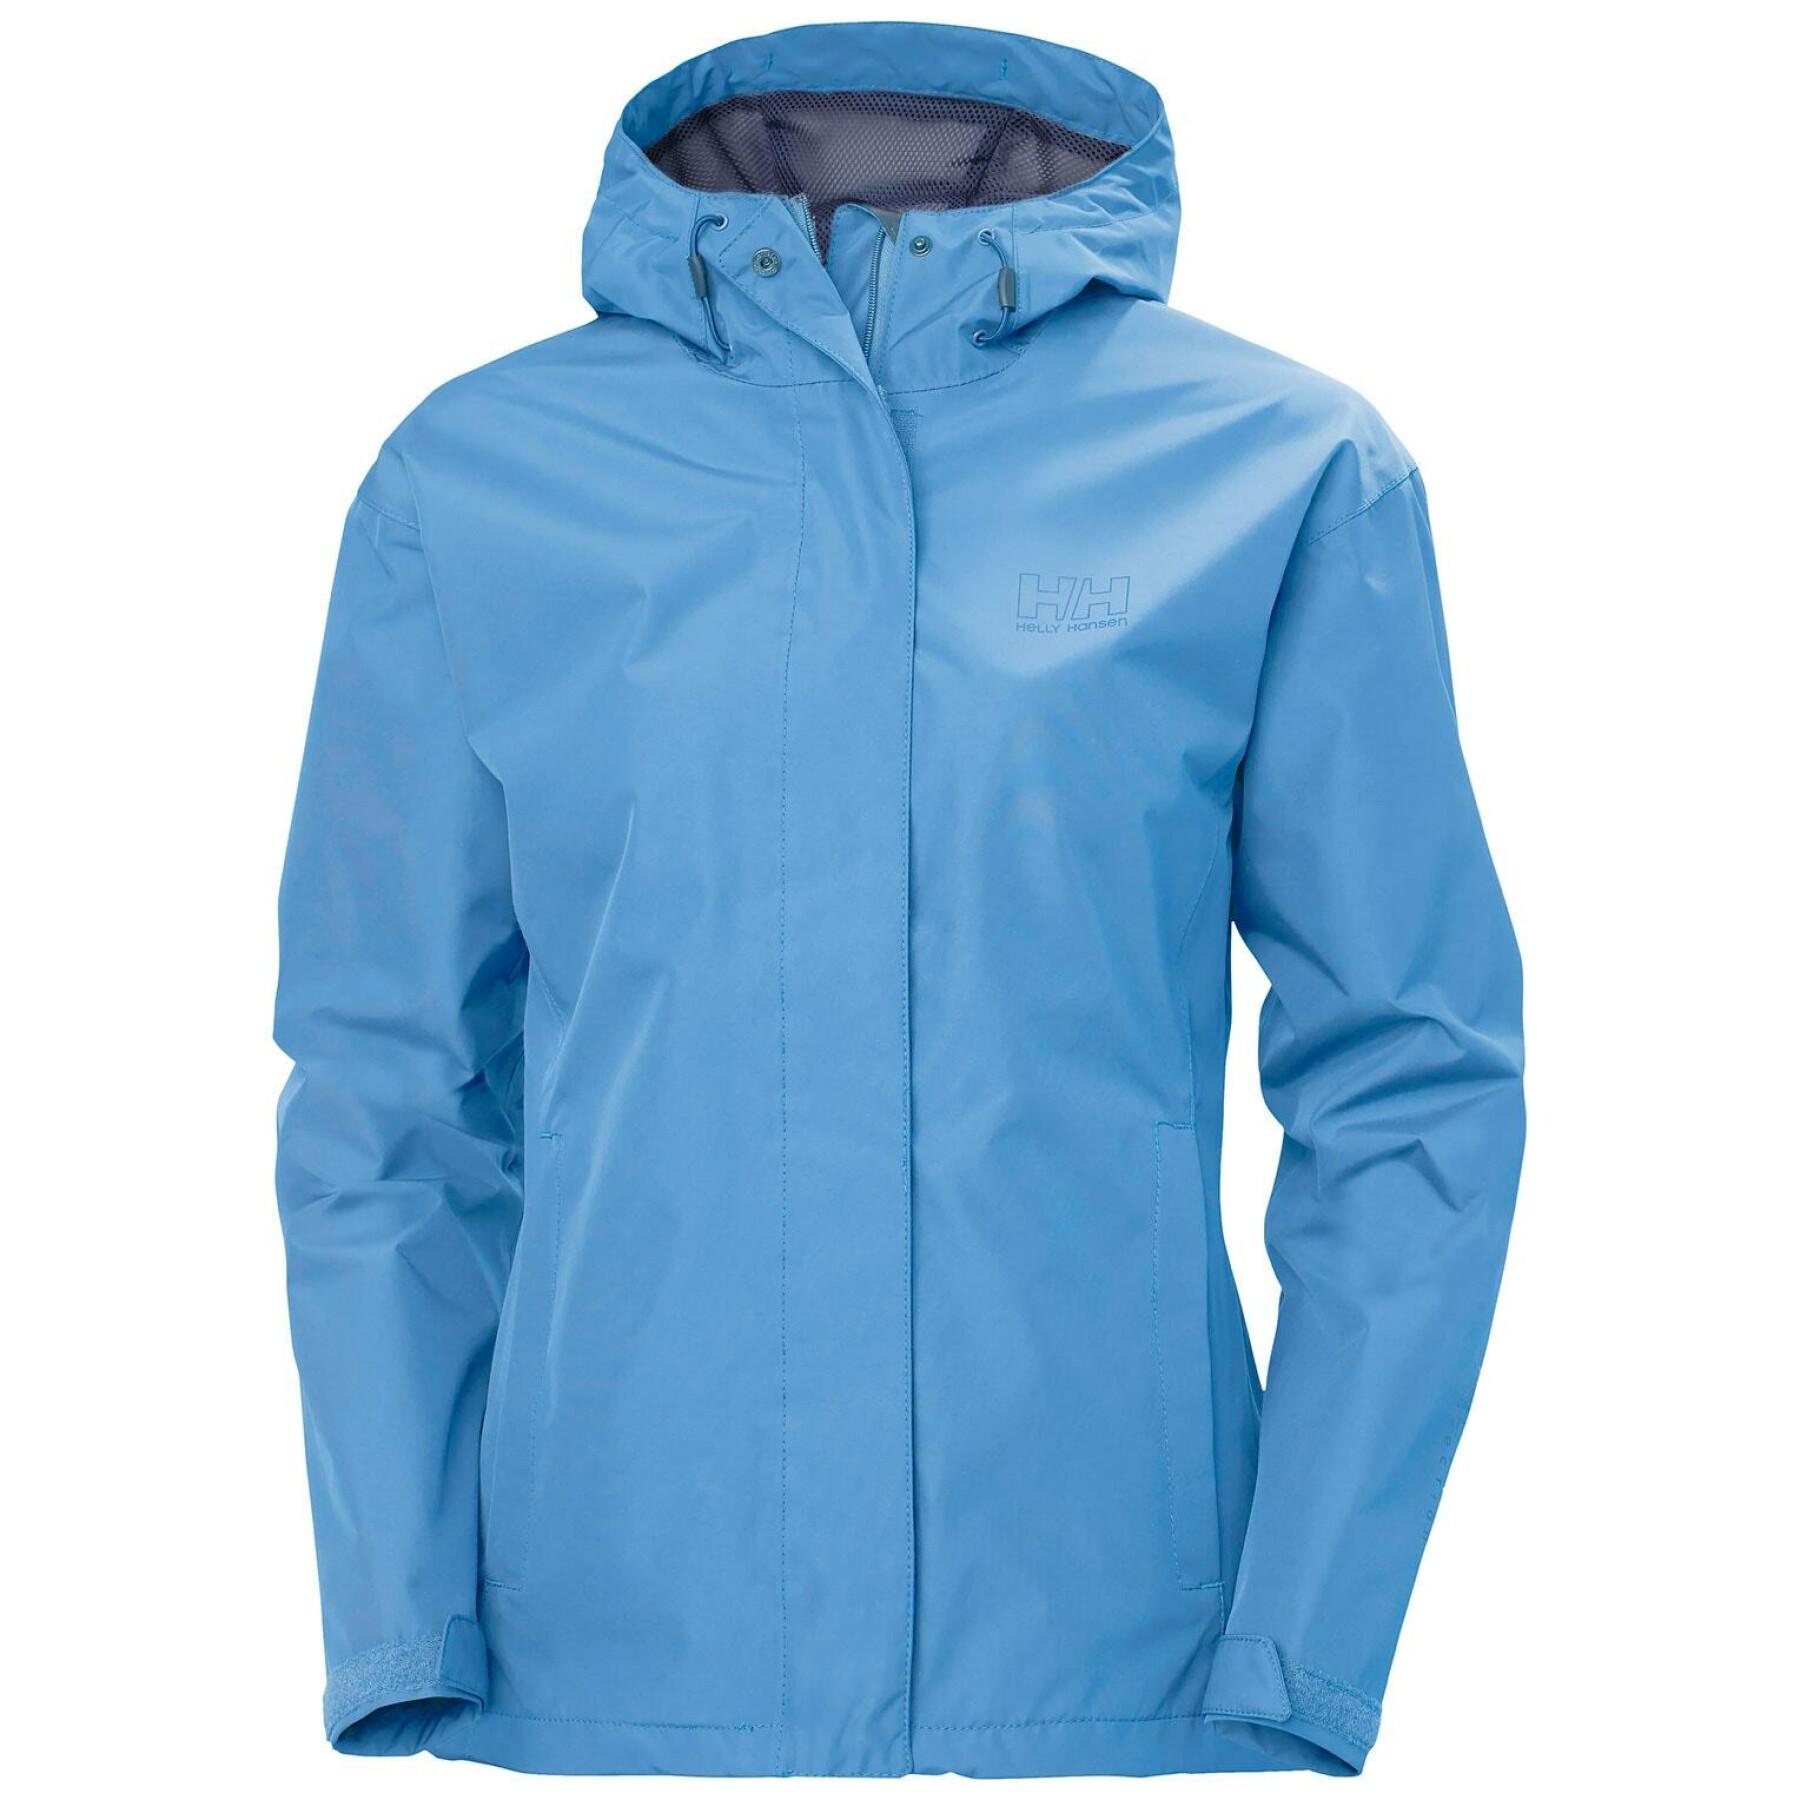 Chaqueta impermeable para mujer Helly Hansen Seven J